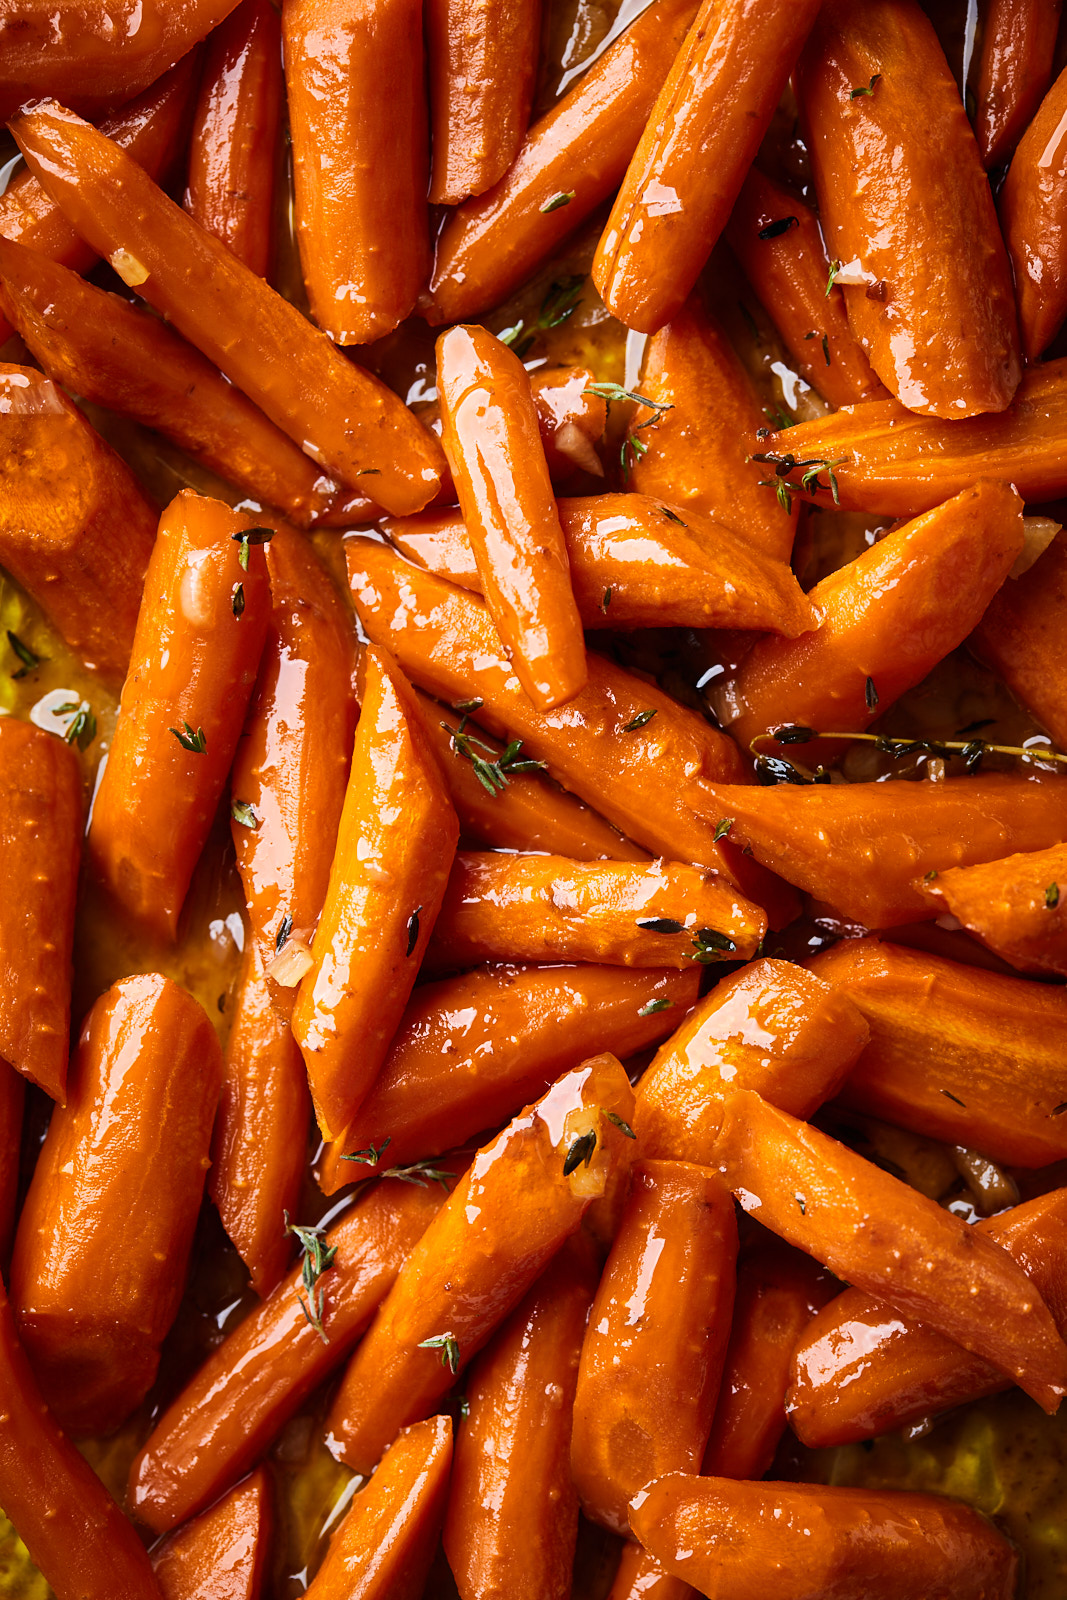 Brown Butter Garlic Maple Roasted Carrot